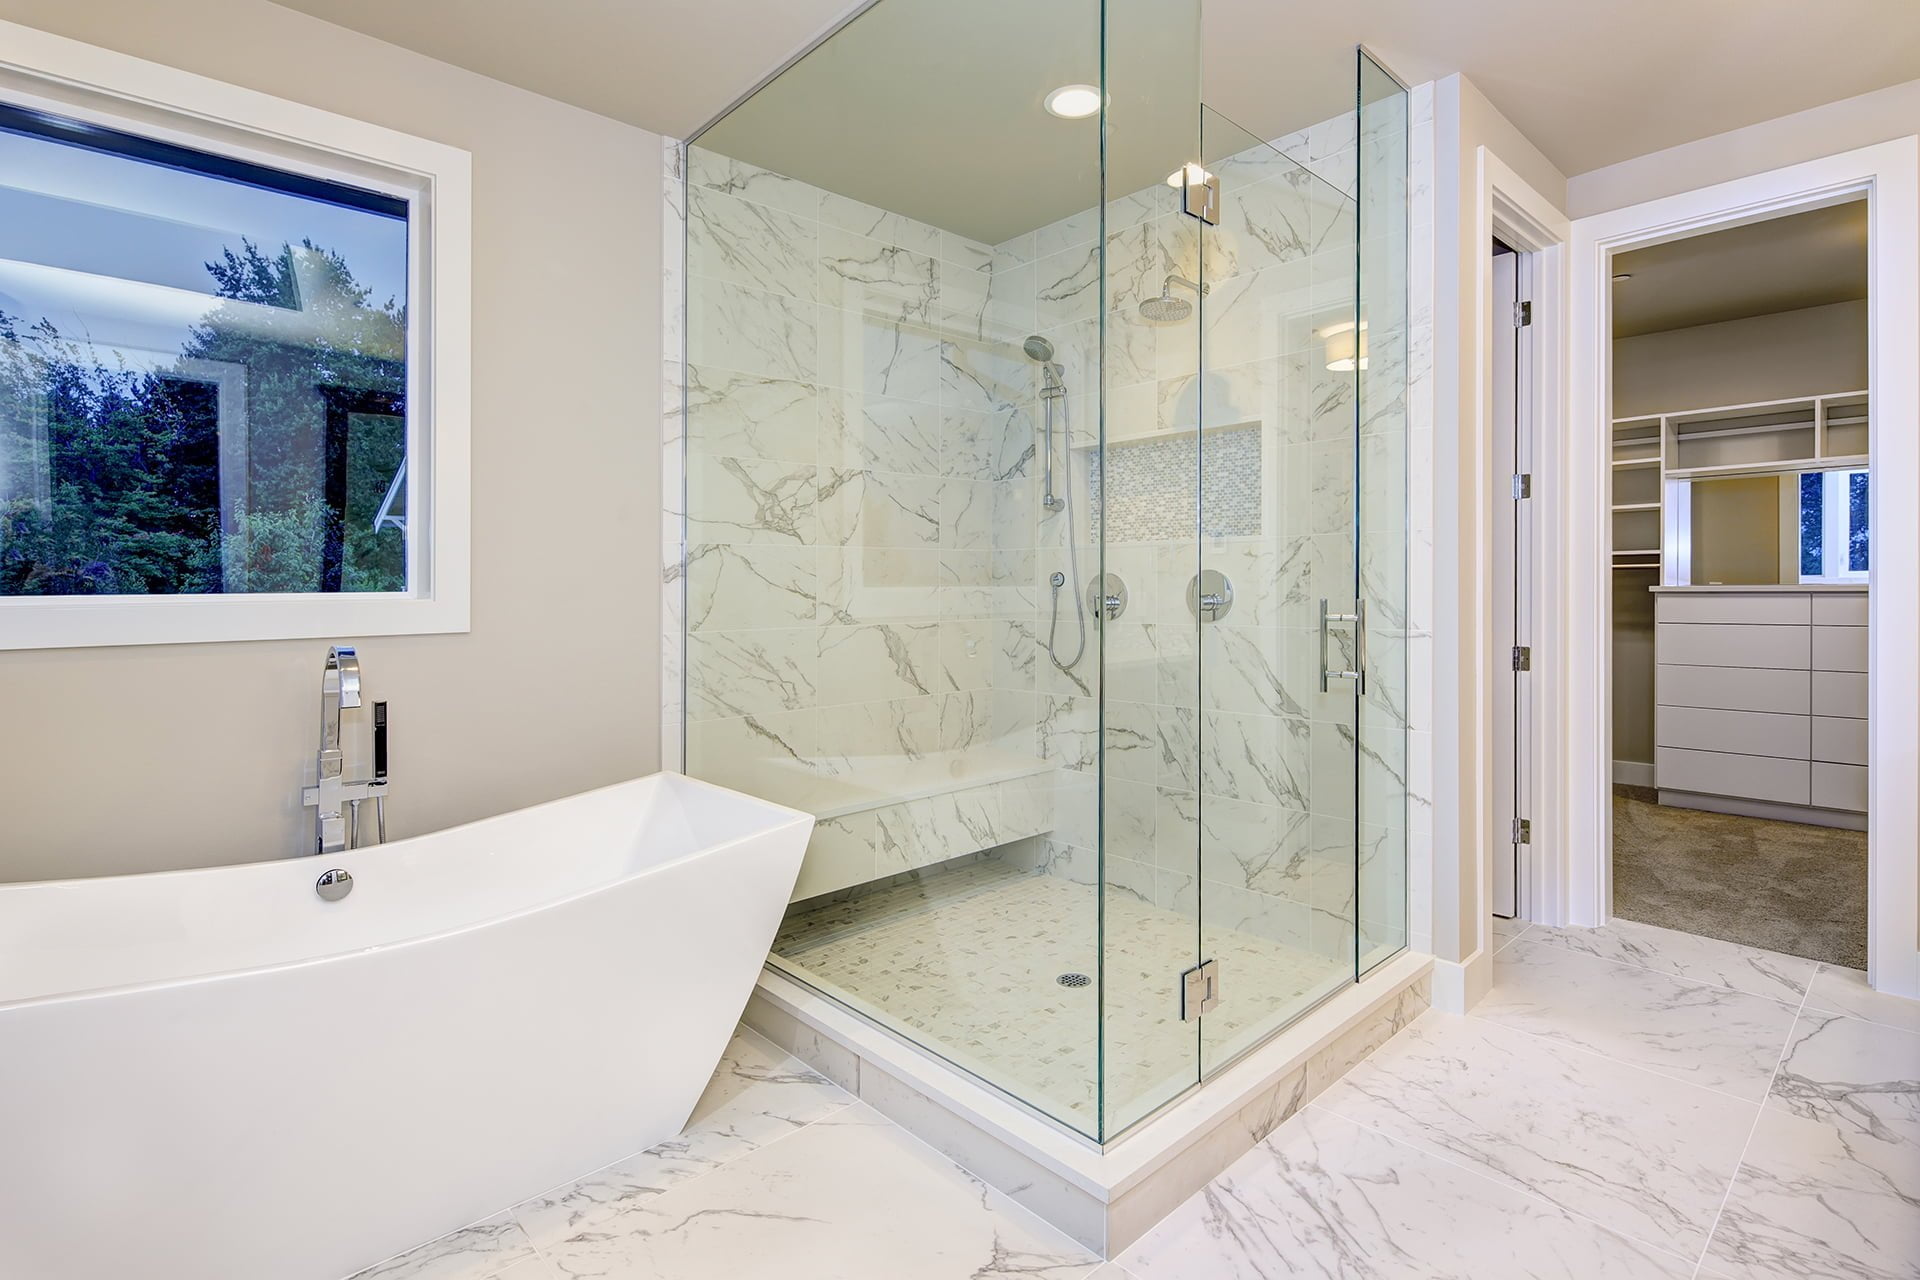 Important Things to Keep in Mind When Doing a New Shower Installation